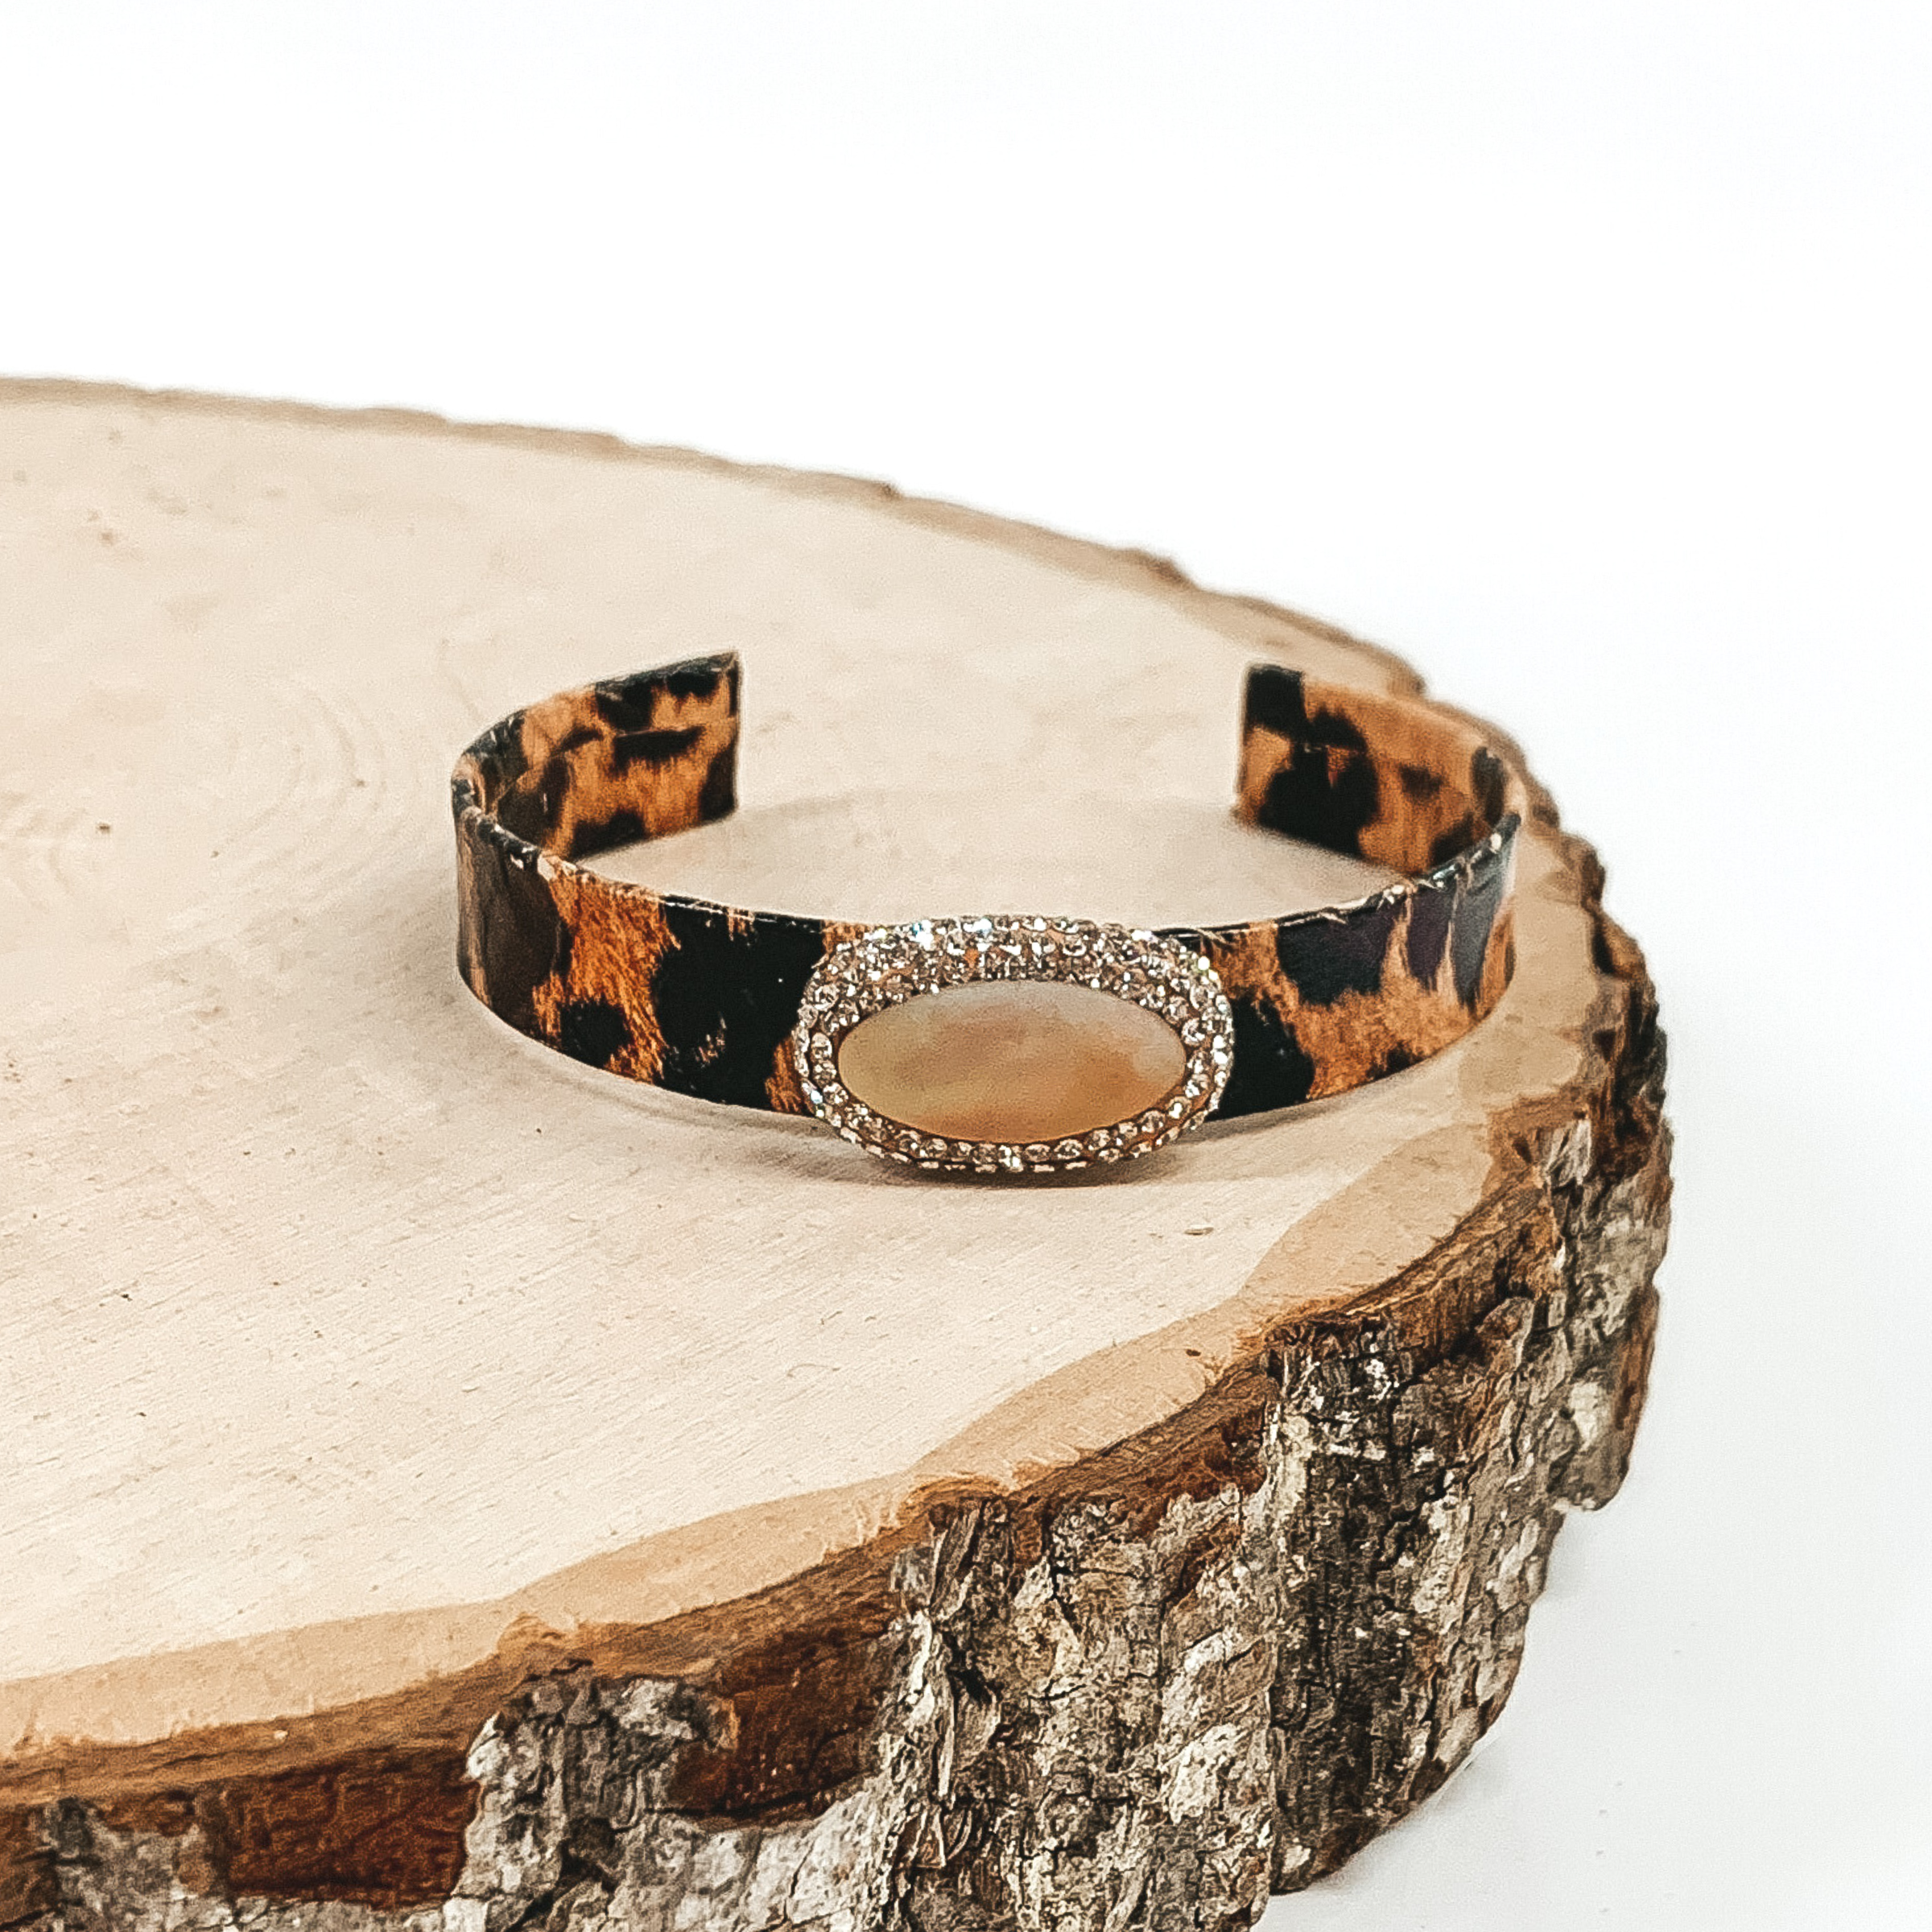 Leopard cuff with champagne oval stone that is outlined in crystals. This cuff is pictured on a piece of wood on a white background. 